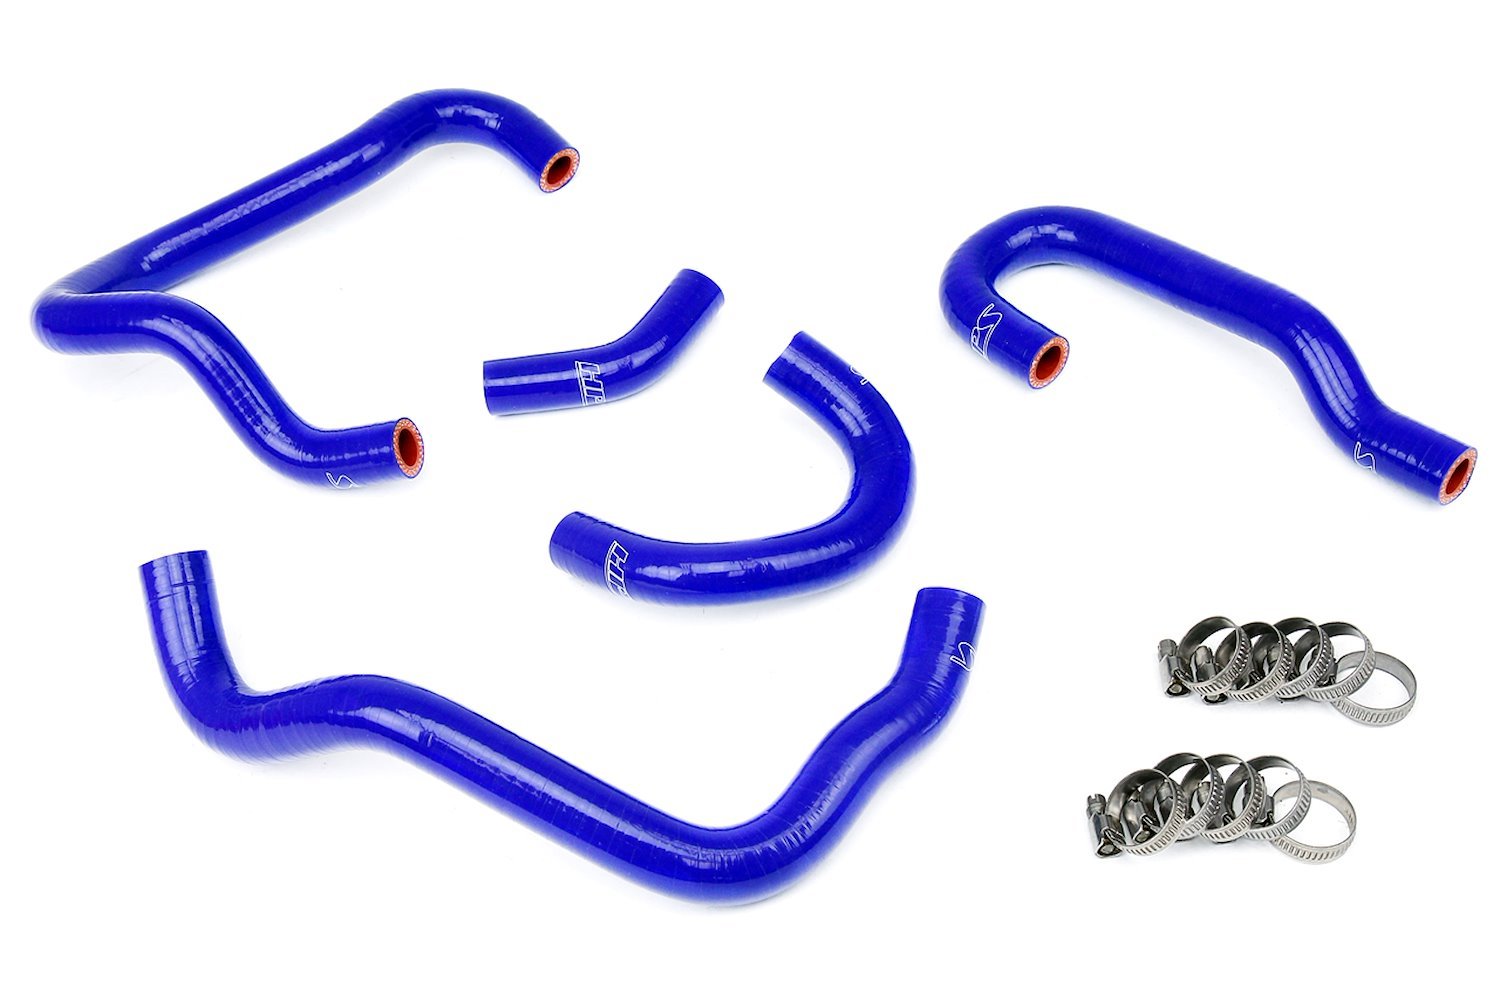 57-1415-BLUE Heater Hose Kit, High-Temp 3-Ply Reinforced Silicone, Replace OEM Rubber Heater Coolant Hoses